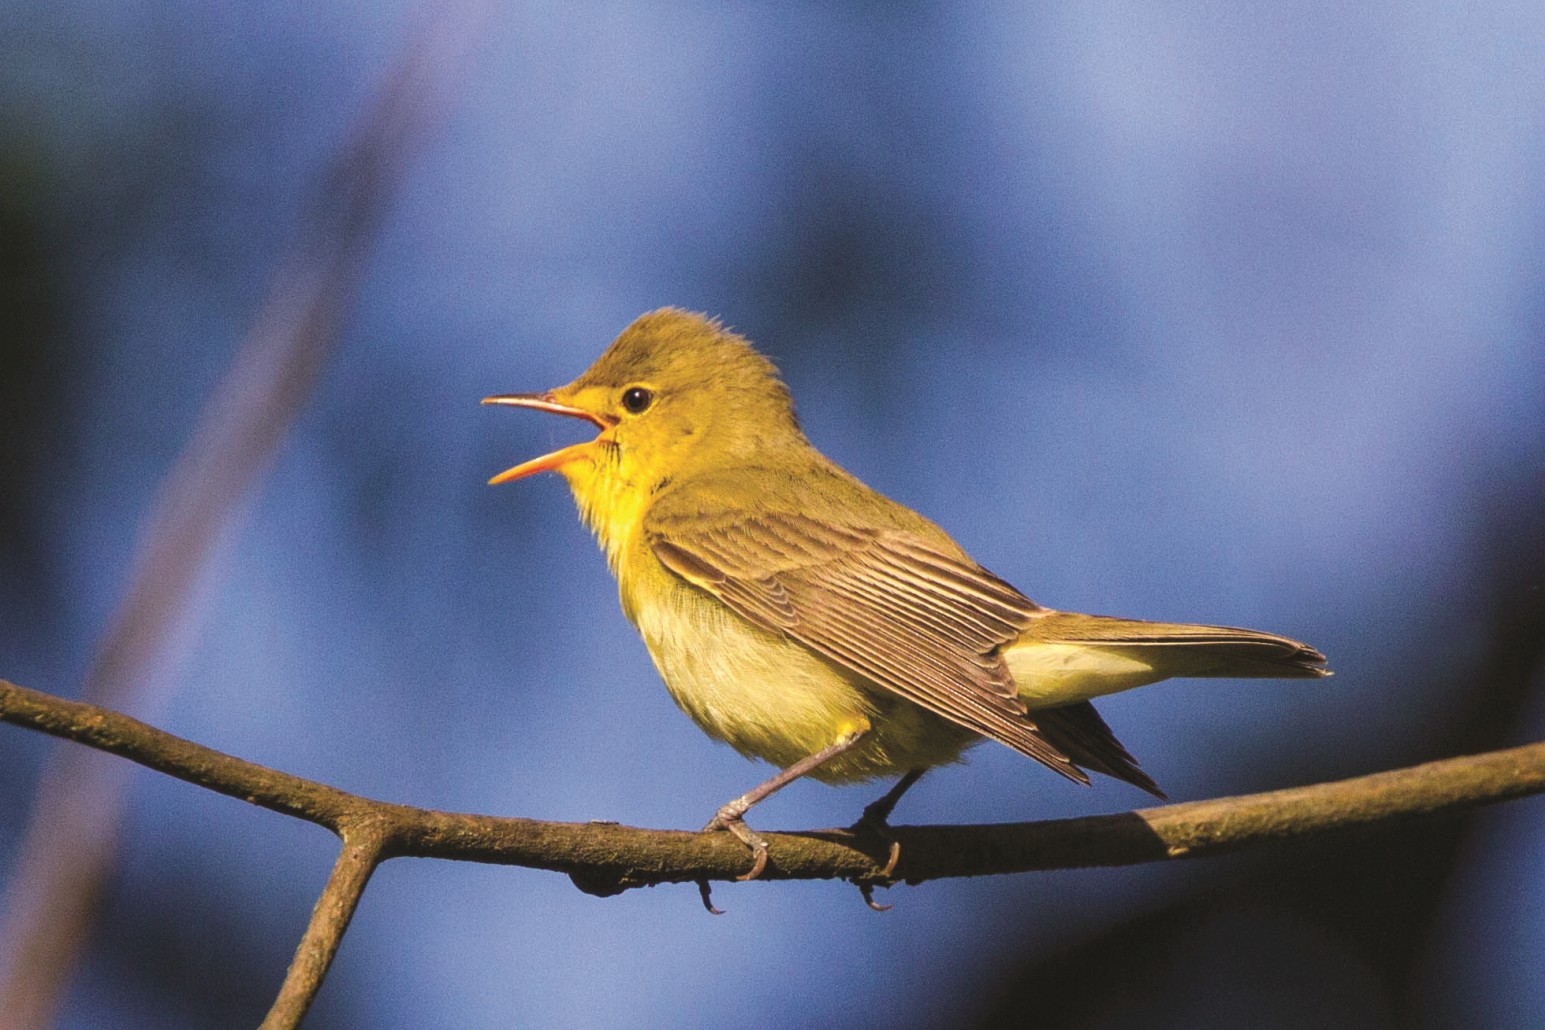 The picture shows a singing yellow warbler sitting on a branch.